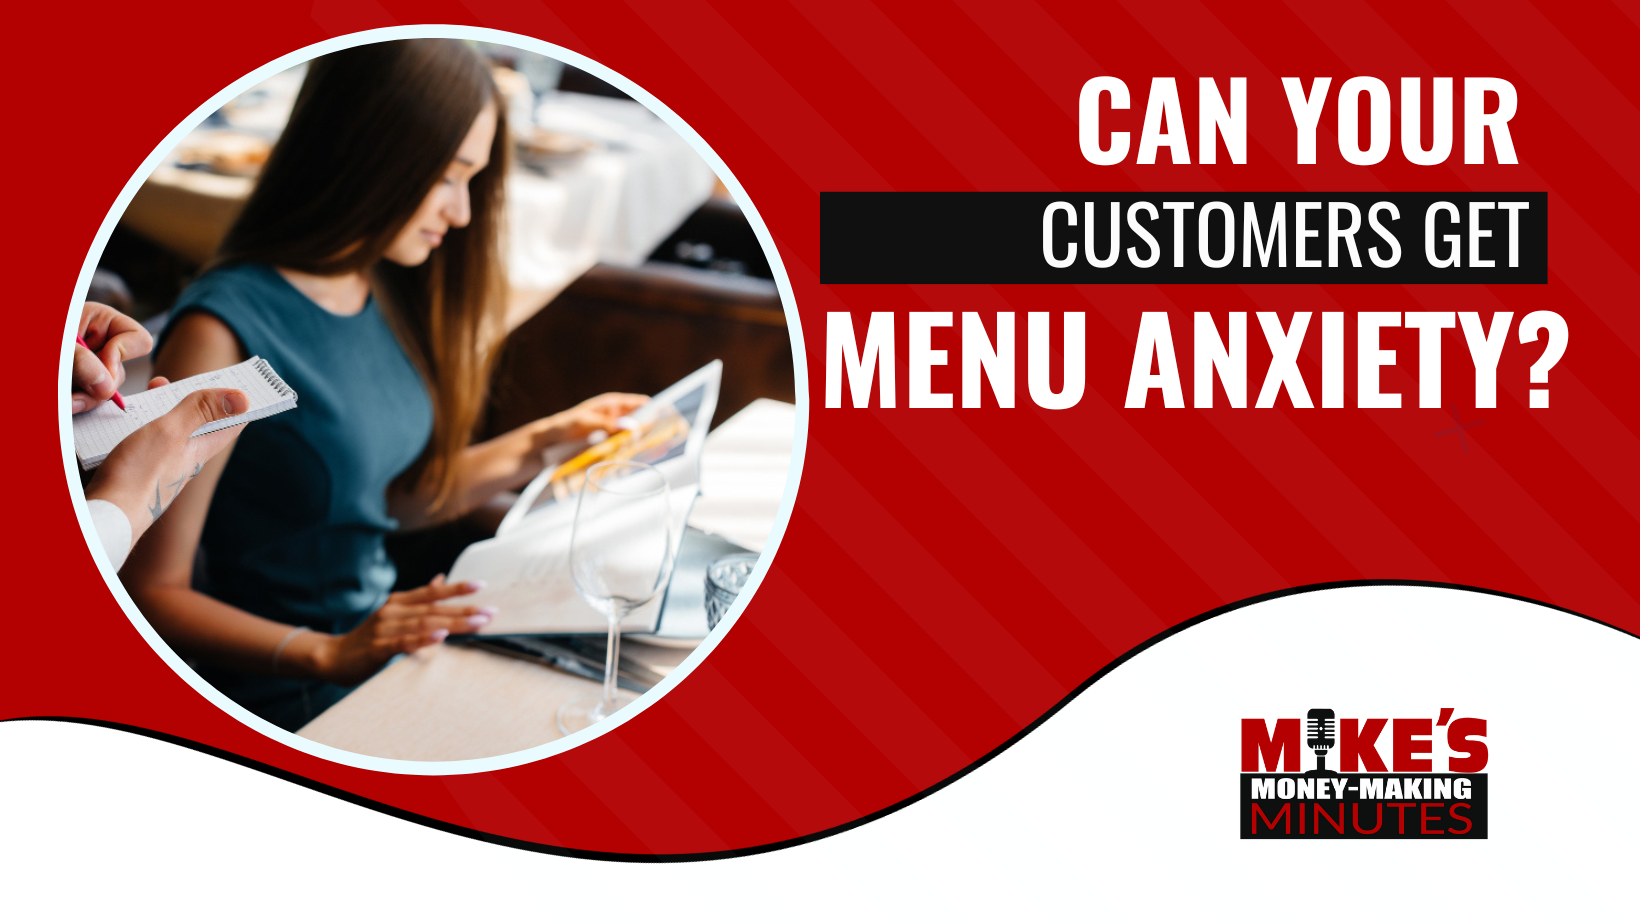 Can Your Customers Get “Menu Anxiety?”